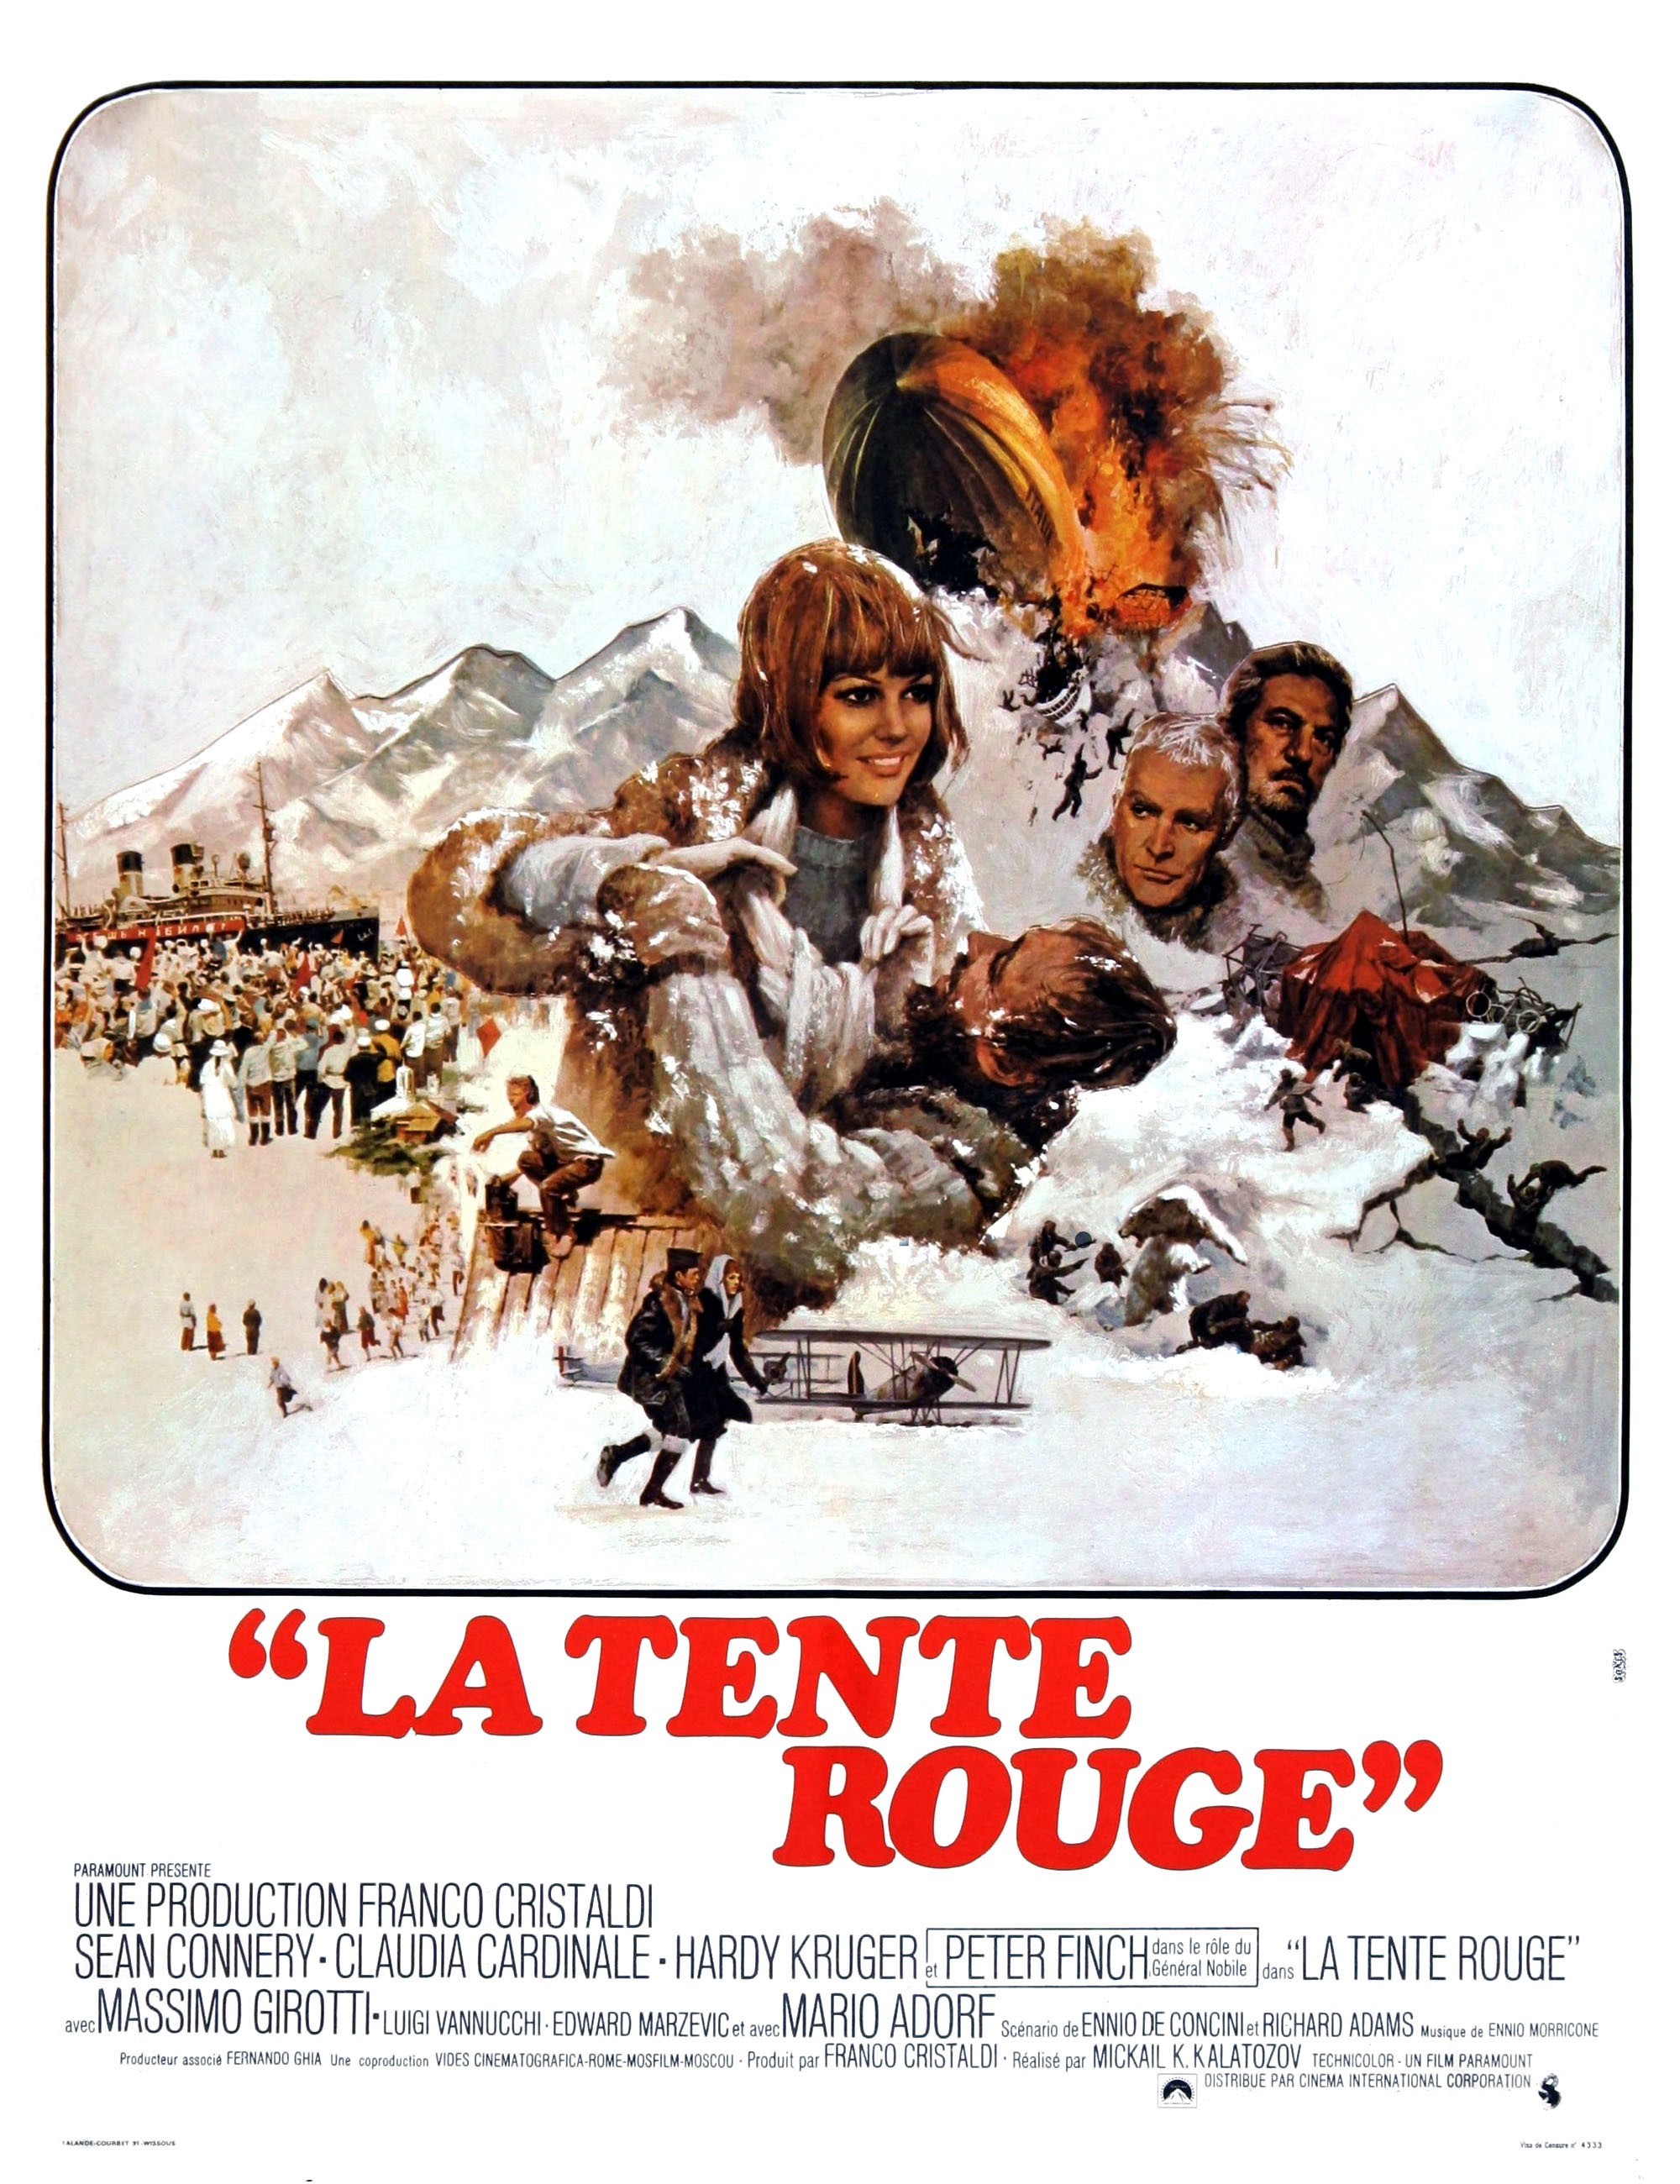 LA TENTE ROUGE ( THE RED TENT)- SEAN CONNERY BOX OFFICE 1971 - BOX OFFICE  STORY